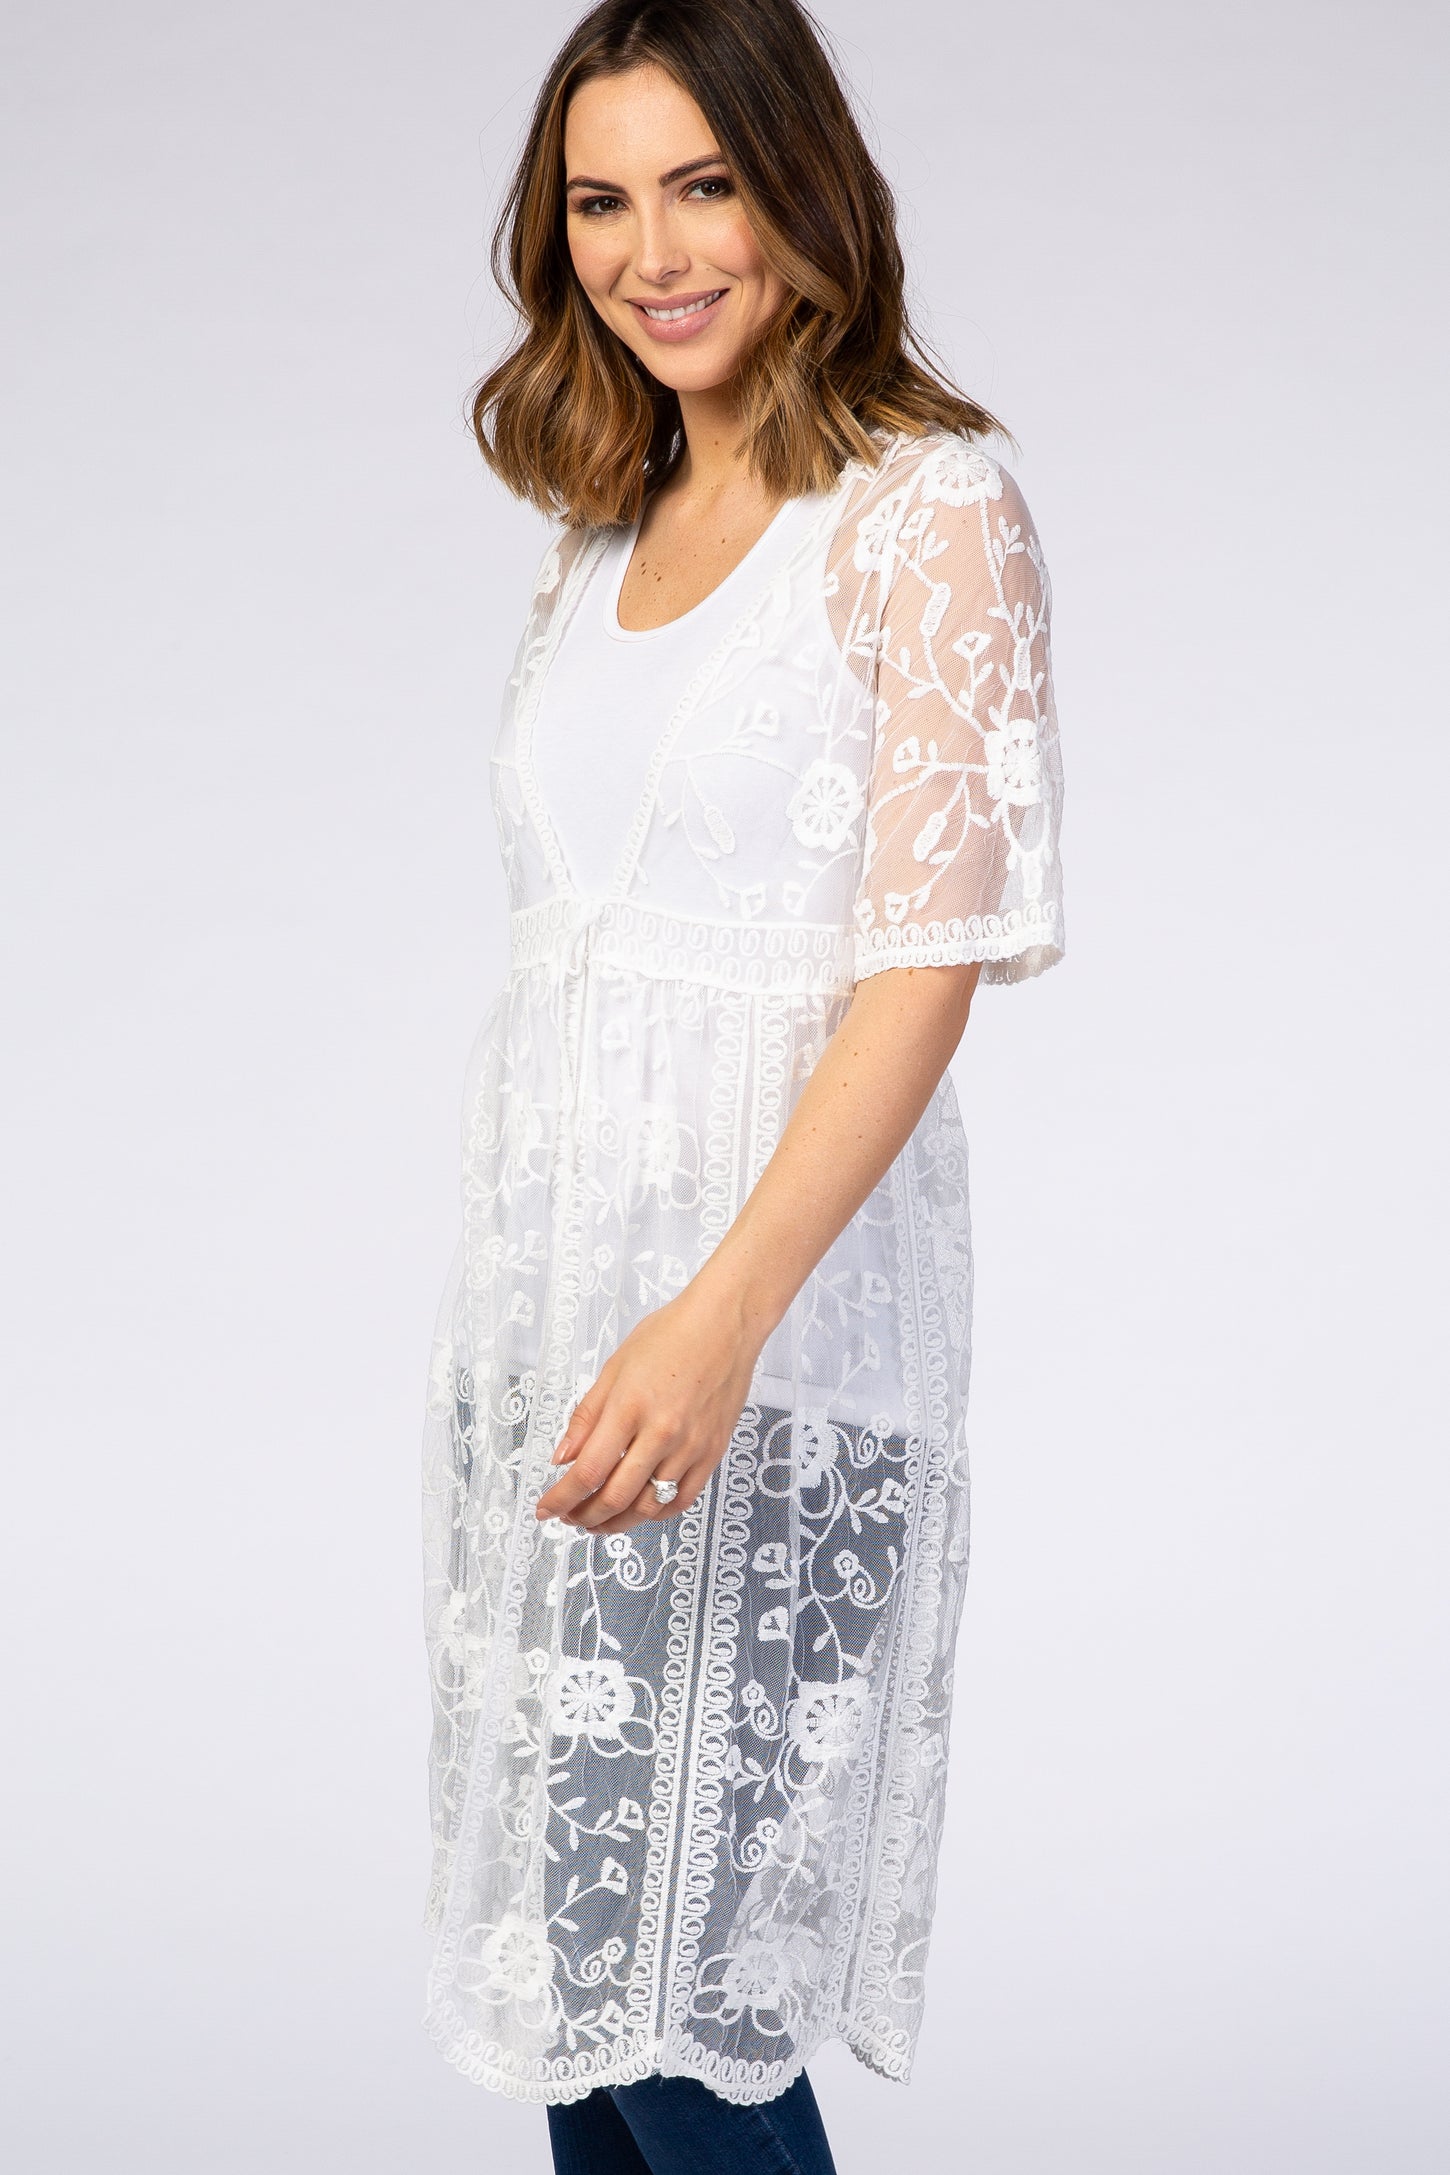 White Lace Mesh Cover Up